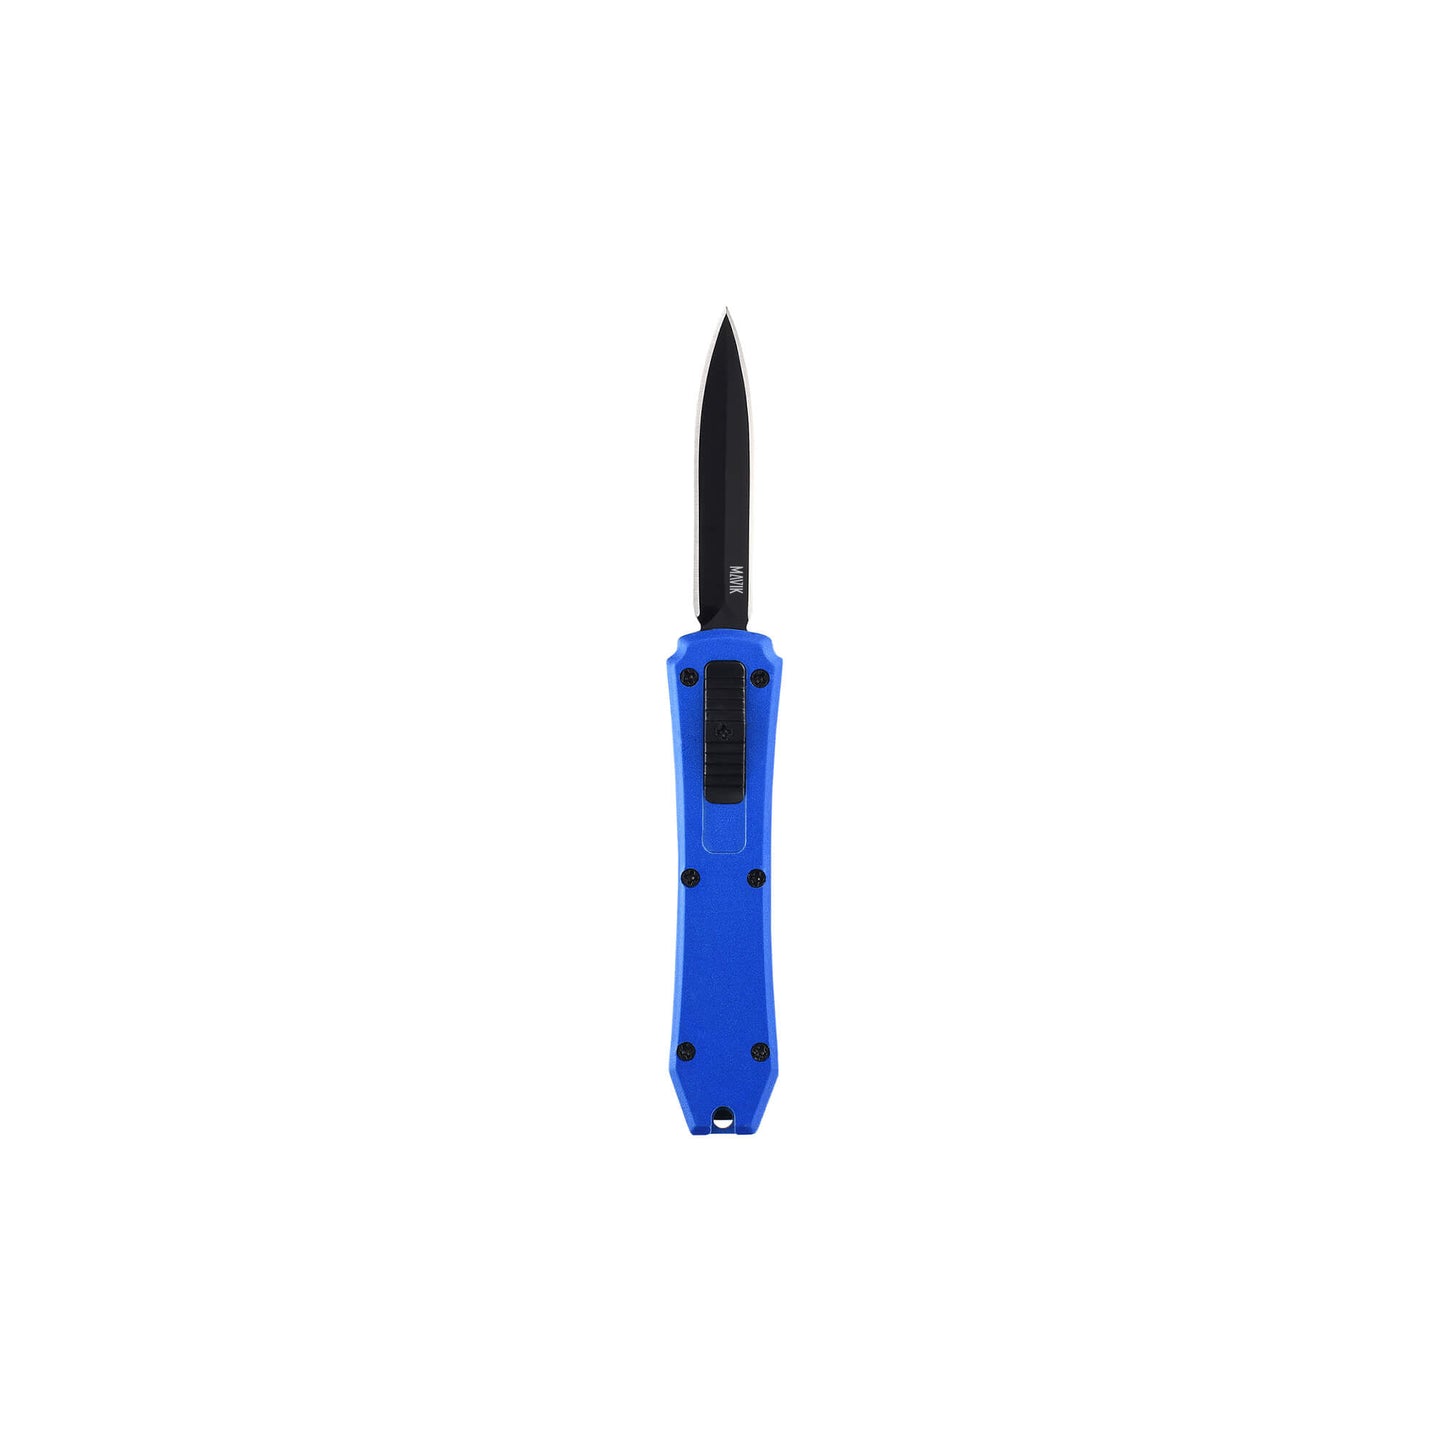 Blue Hunting, fishing, EDC Mini automatic OTF knife Xkarve with spear point blade, Zinc alloy handle and lanyard hole.